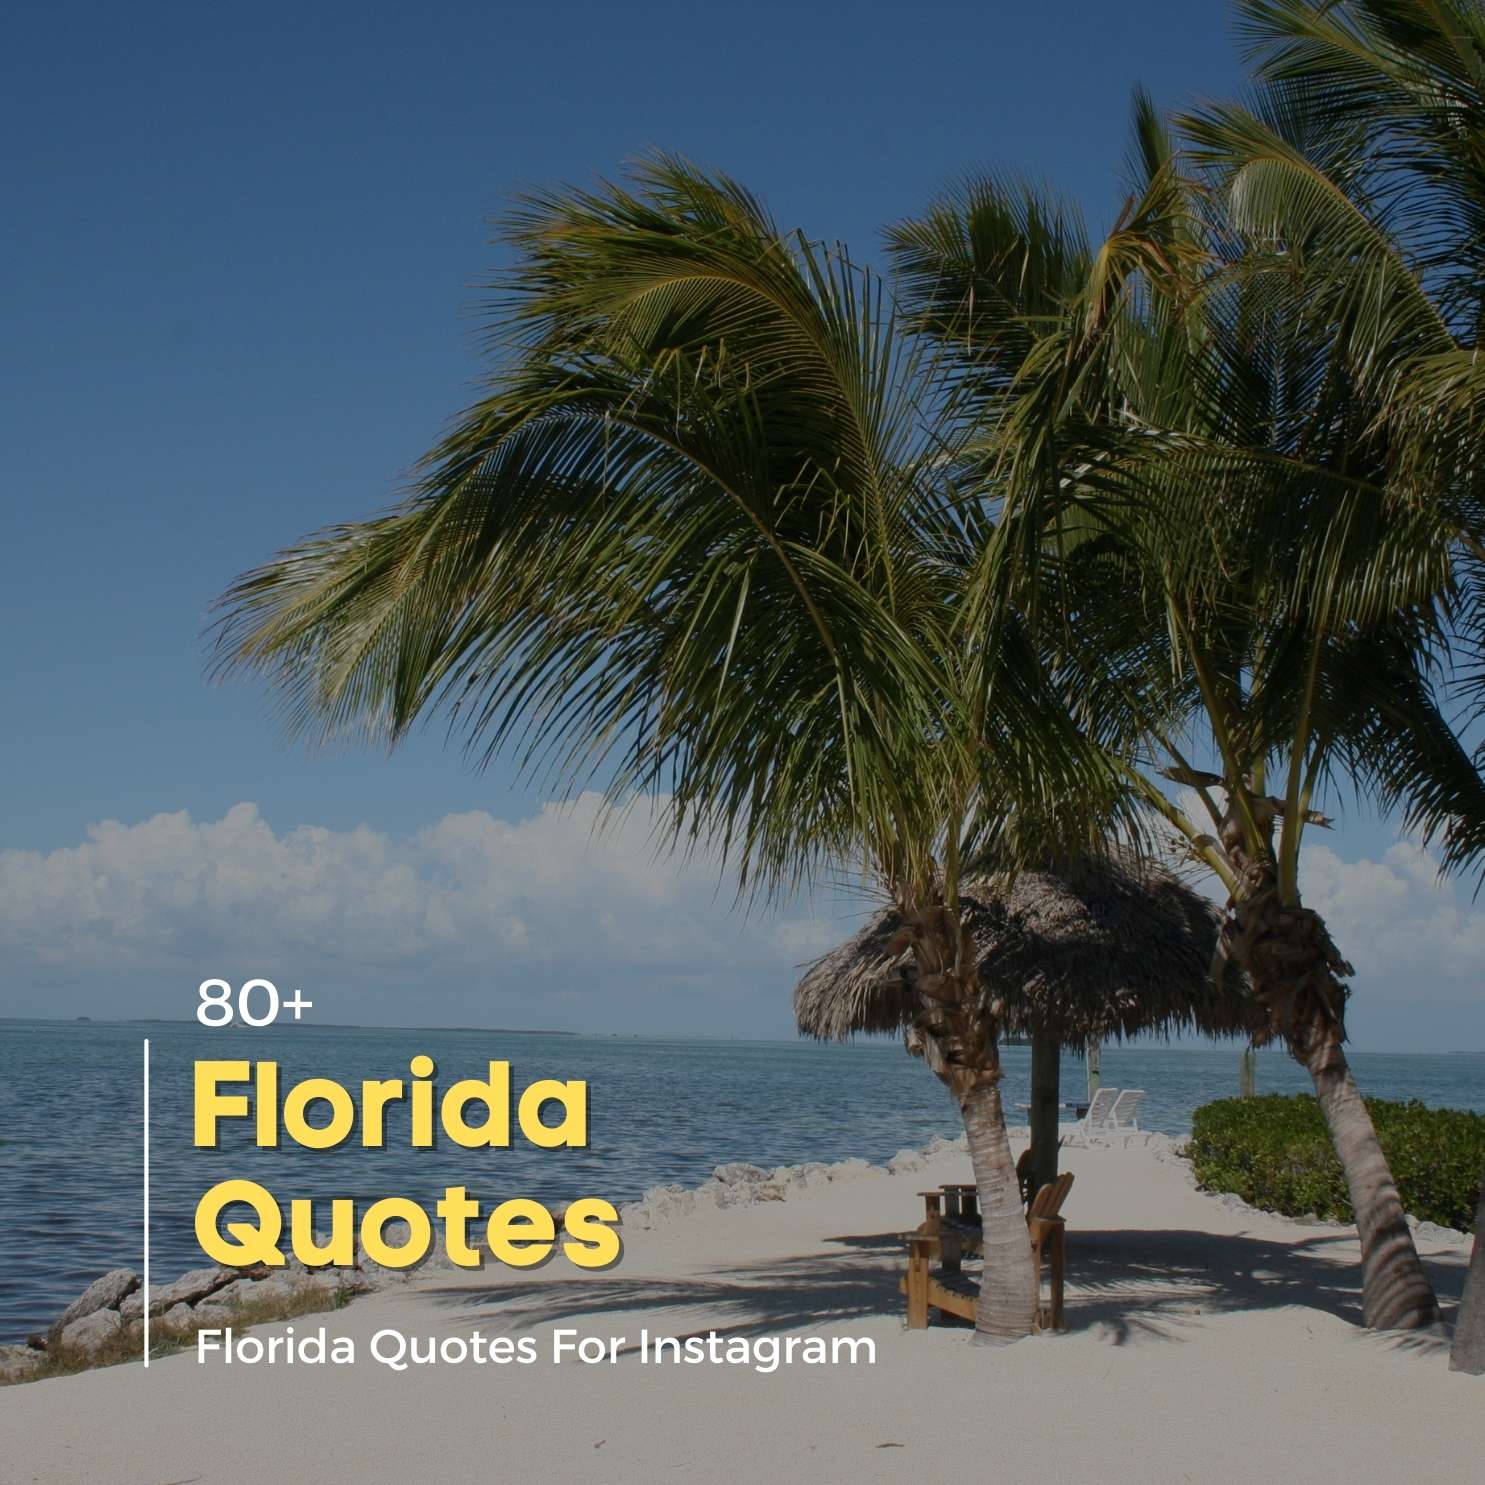 Florida Quotes And Sayings